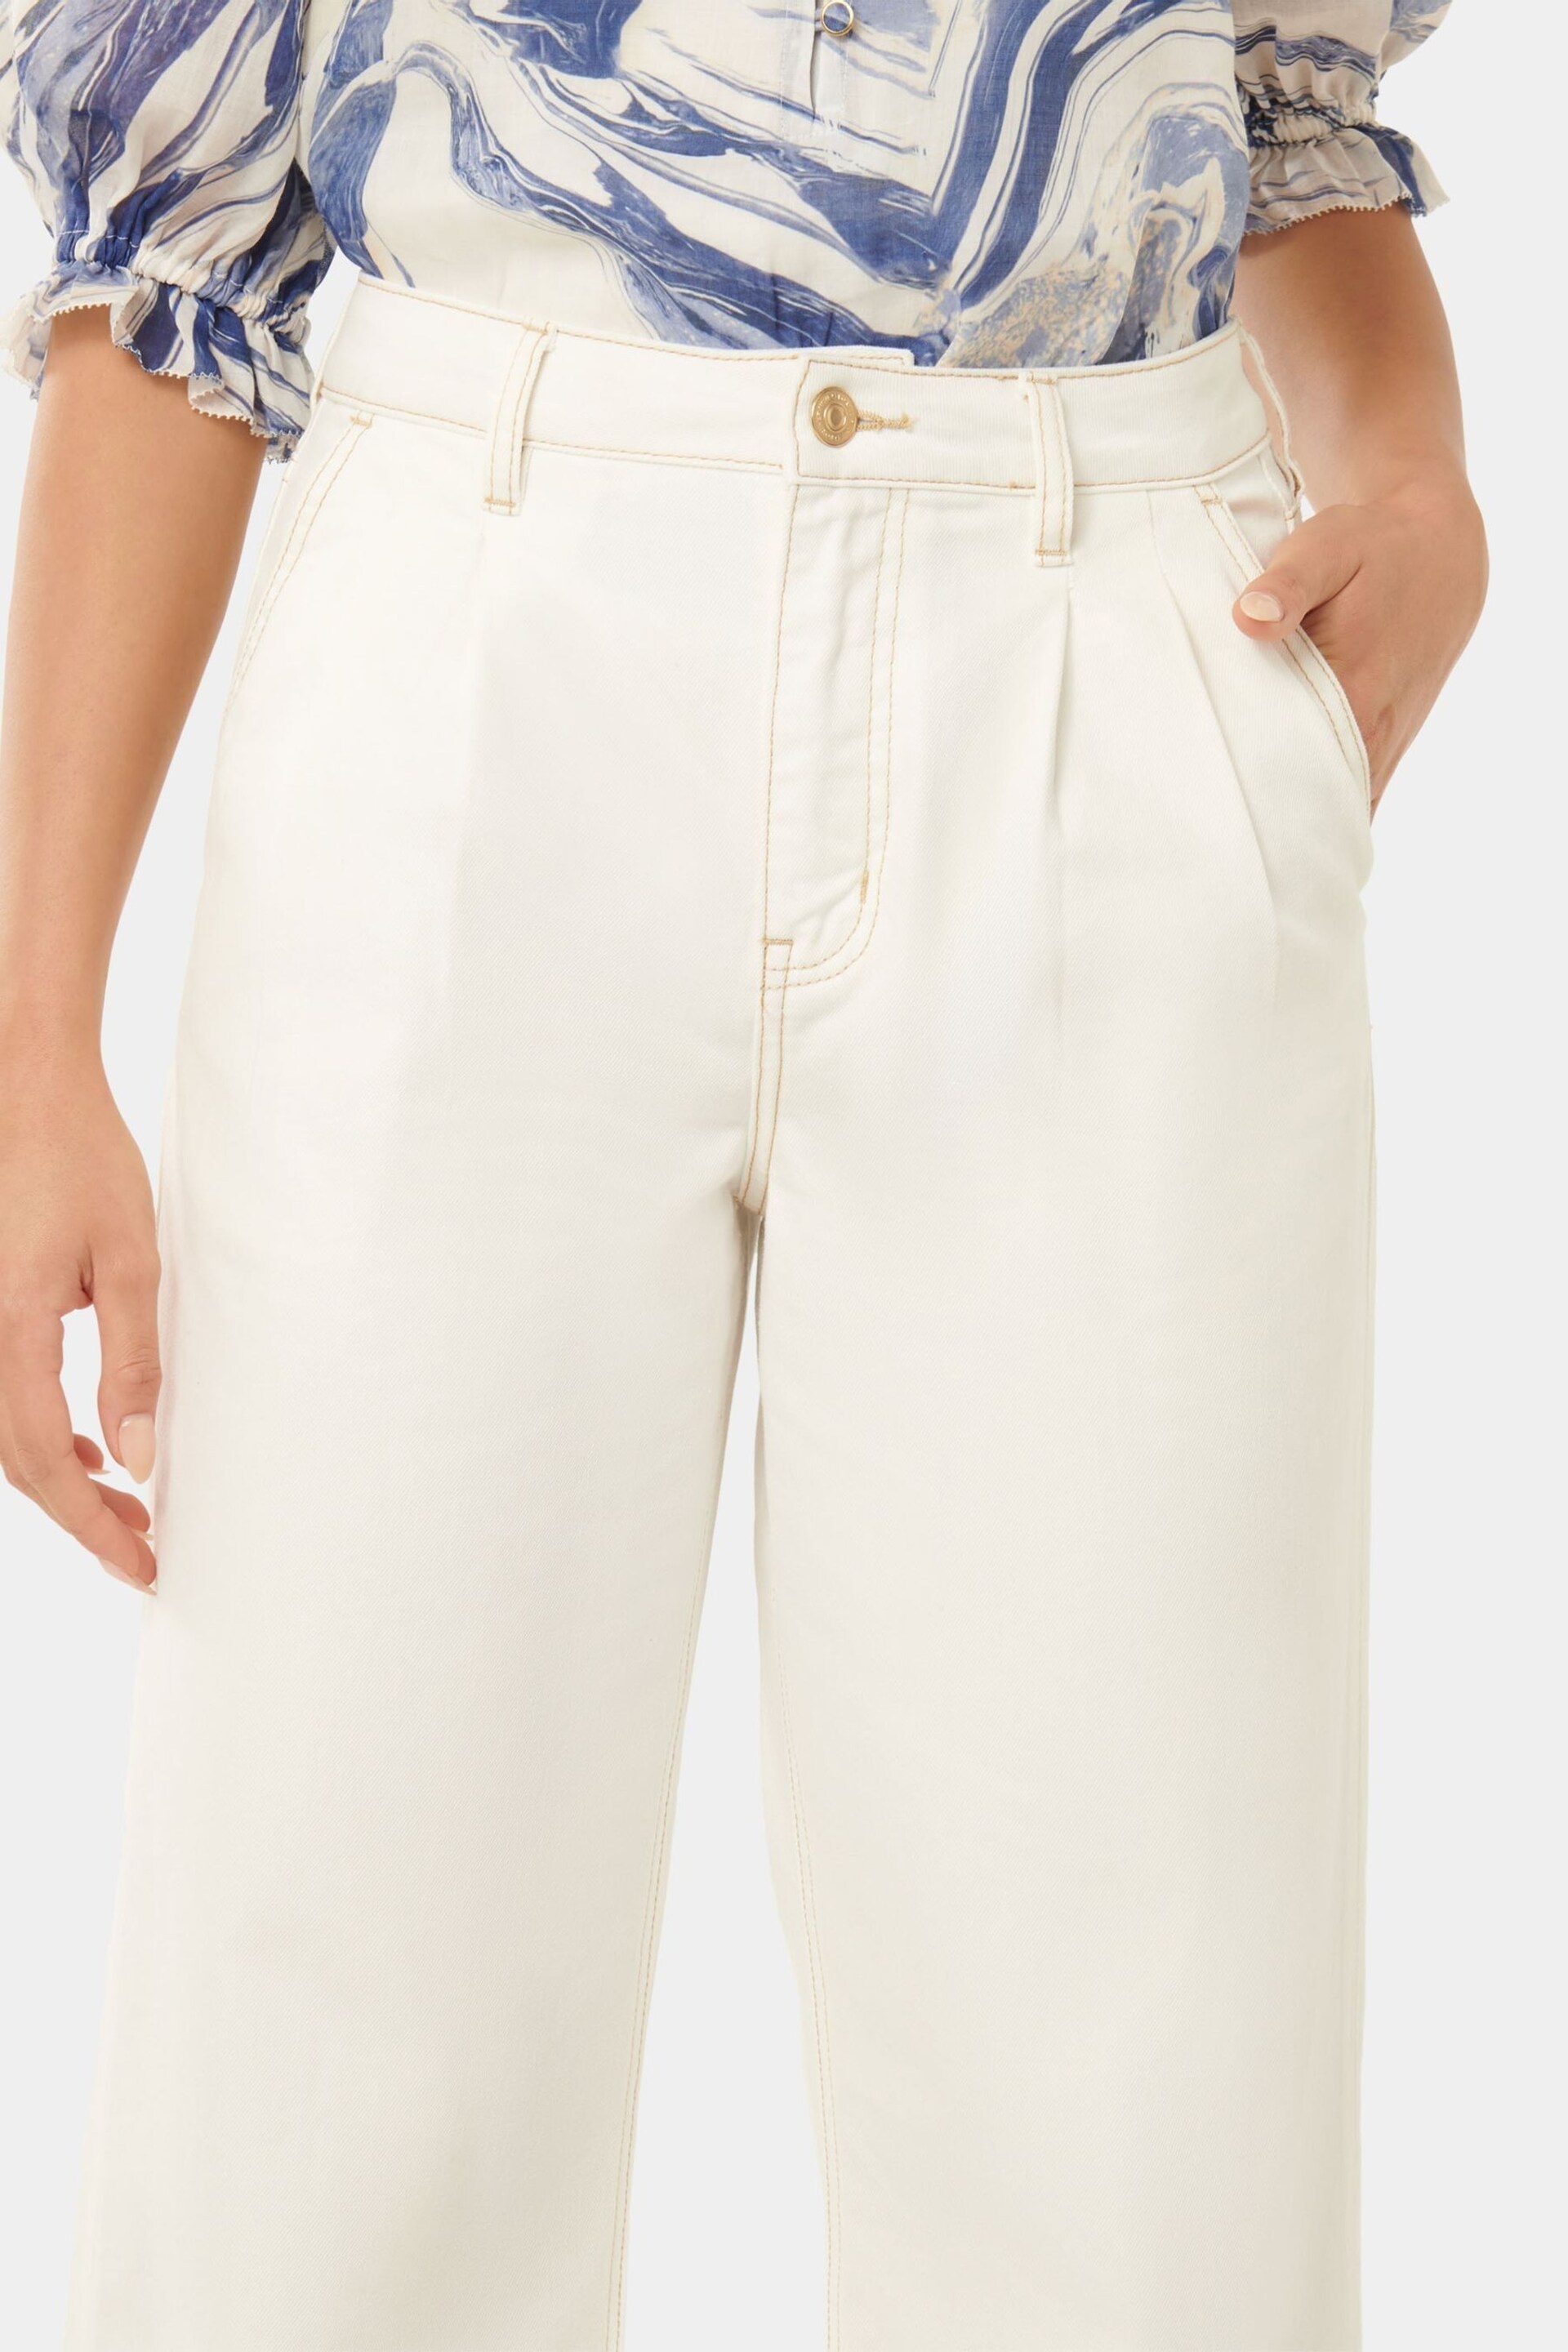 Forever New White Pippa Wide Leg Jeans - Image 2 of 5